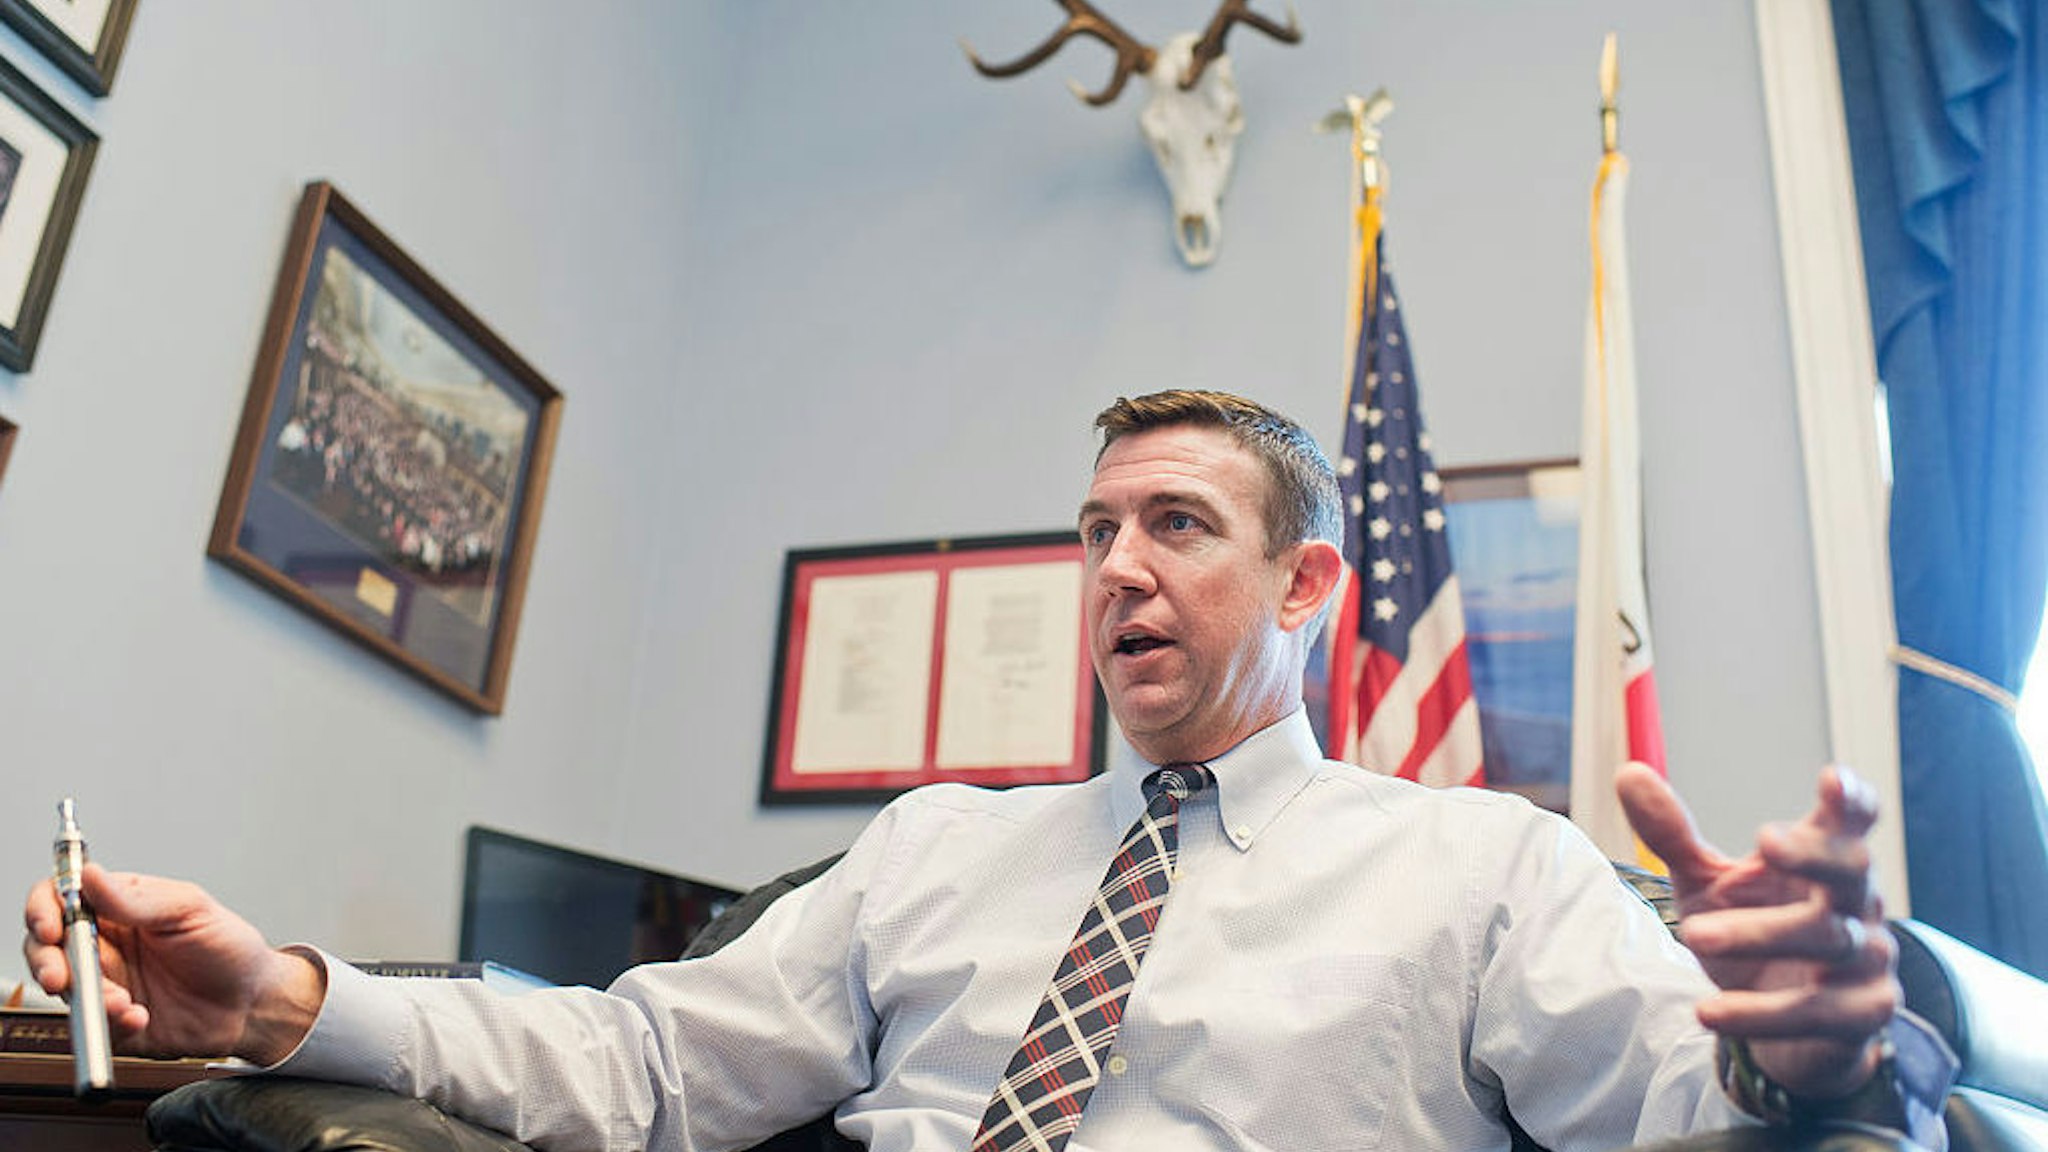 Rep. Duncan Hunter, R-Calif., is interviewed about his vaporizer pen in his Rayburn office, January 12, 2016. (Photo By Tom Williams/CQ Roll Call)